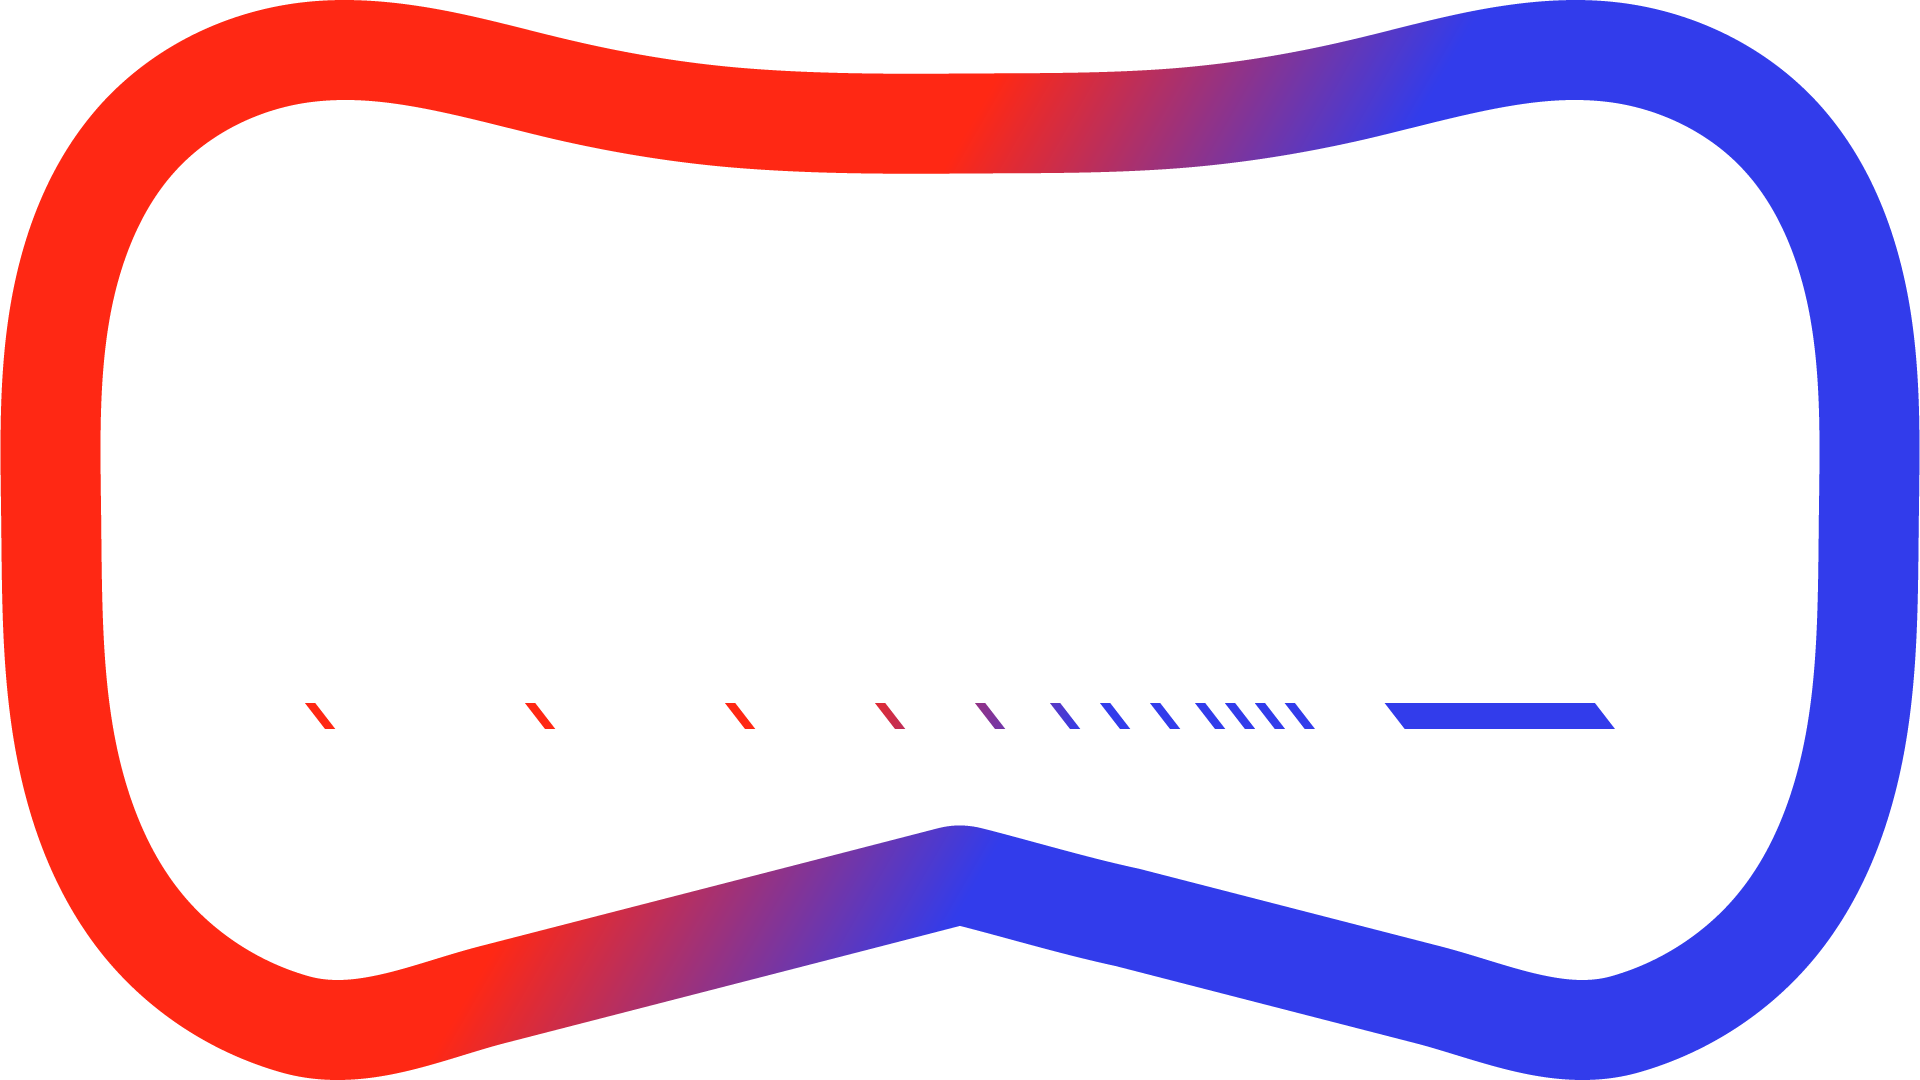 PCL logo, Basic outline of a VR headset with the letters PCL inside the outline